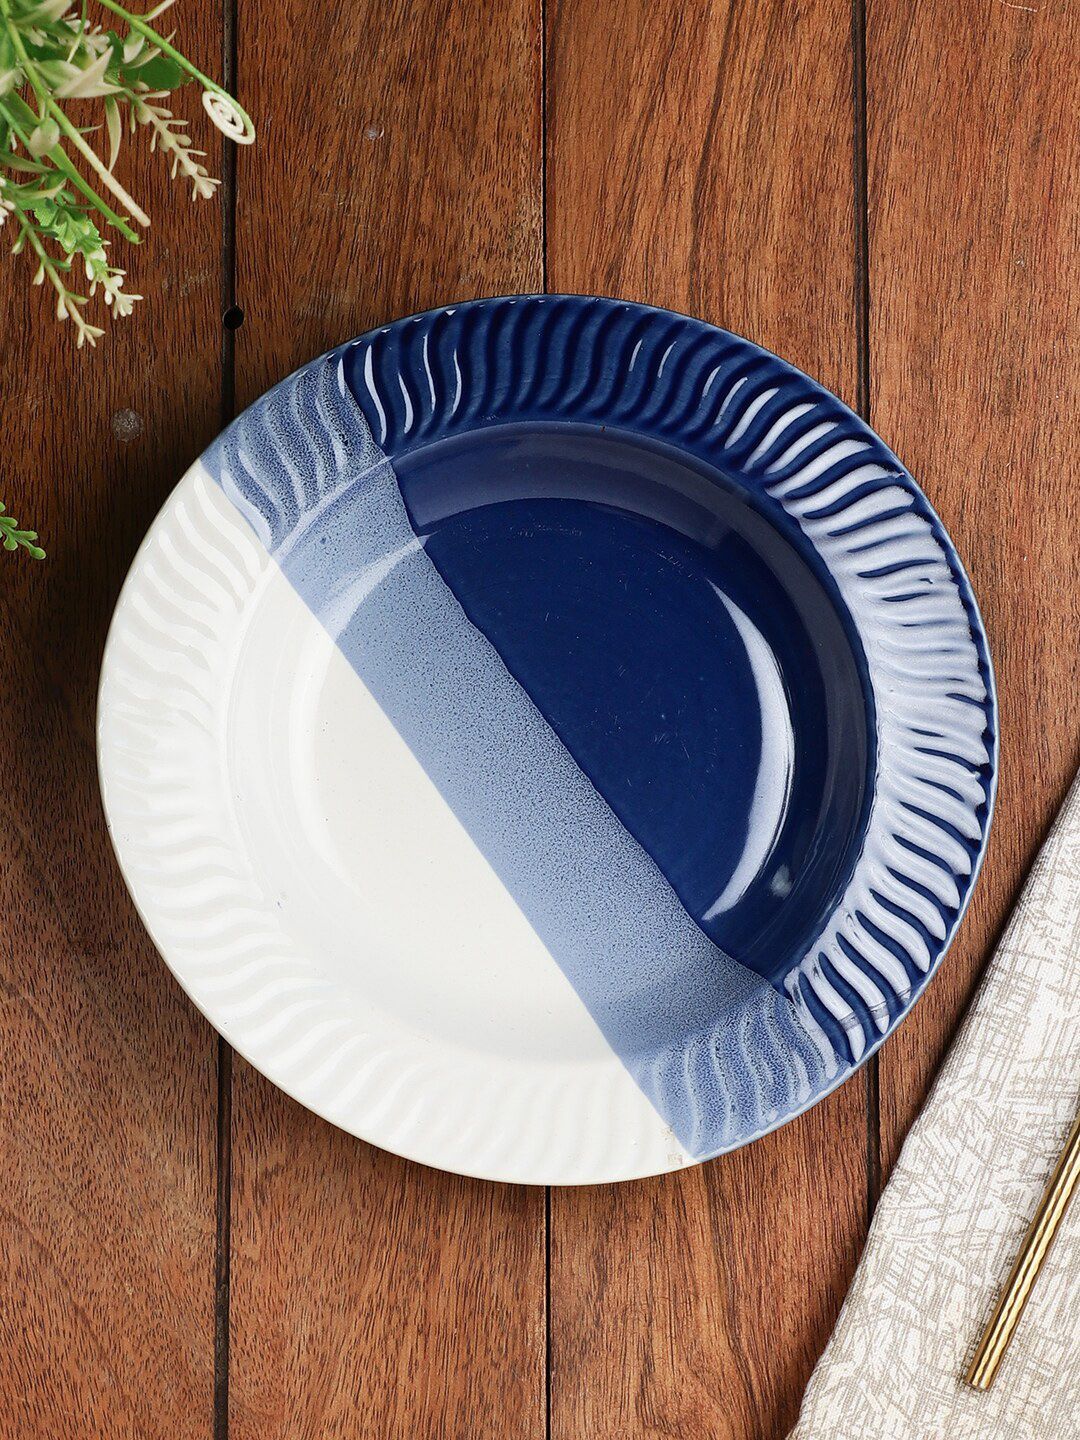 MIAH Decor Blue & White Printed Porcelain Glossy Bowl Price in India